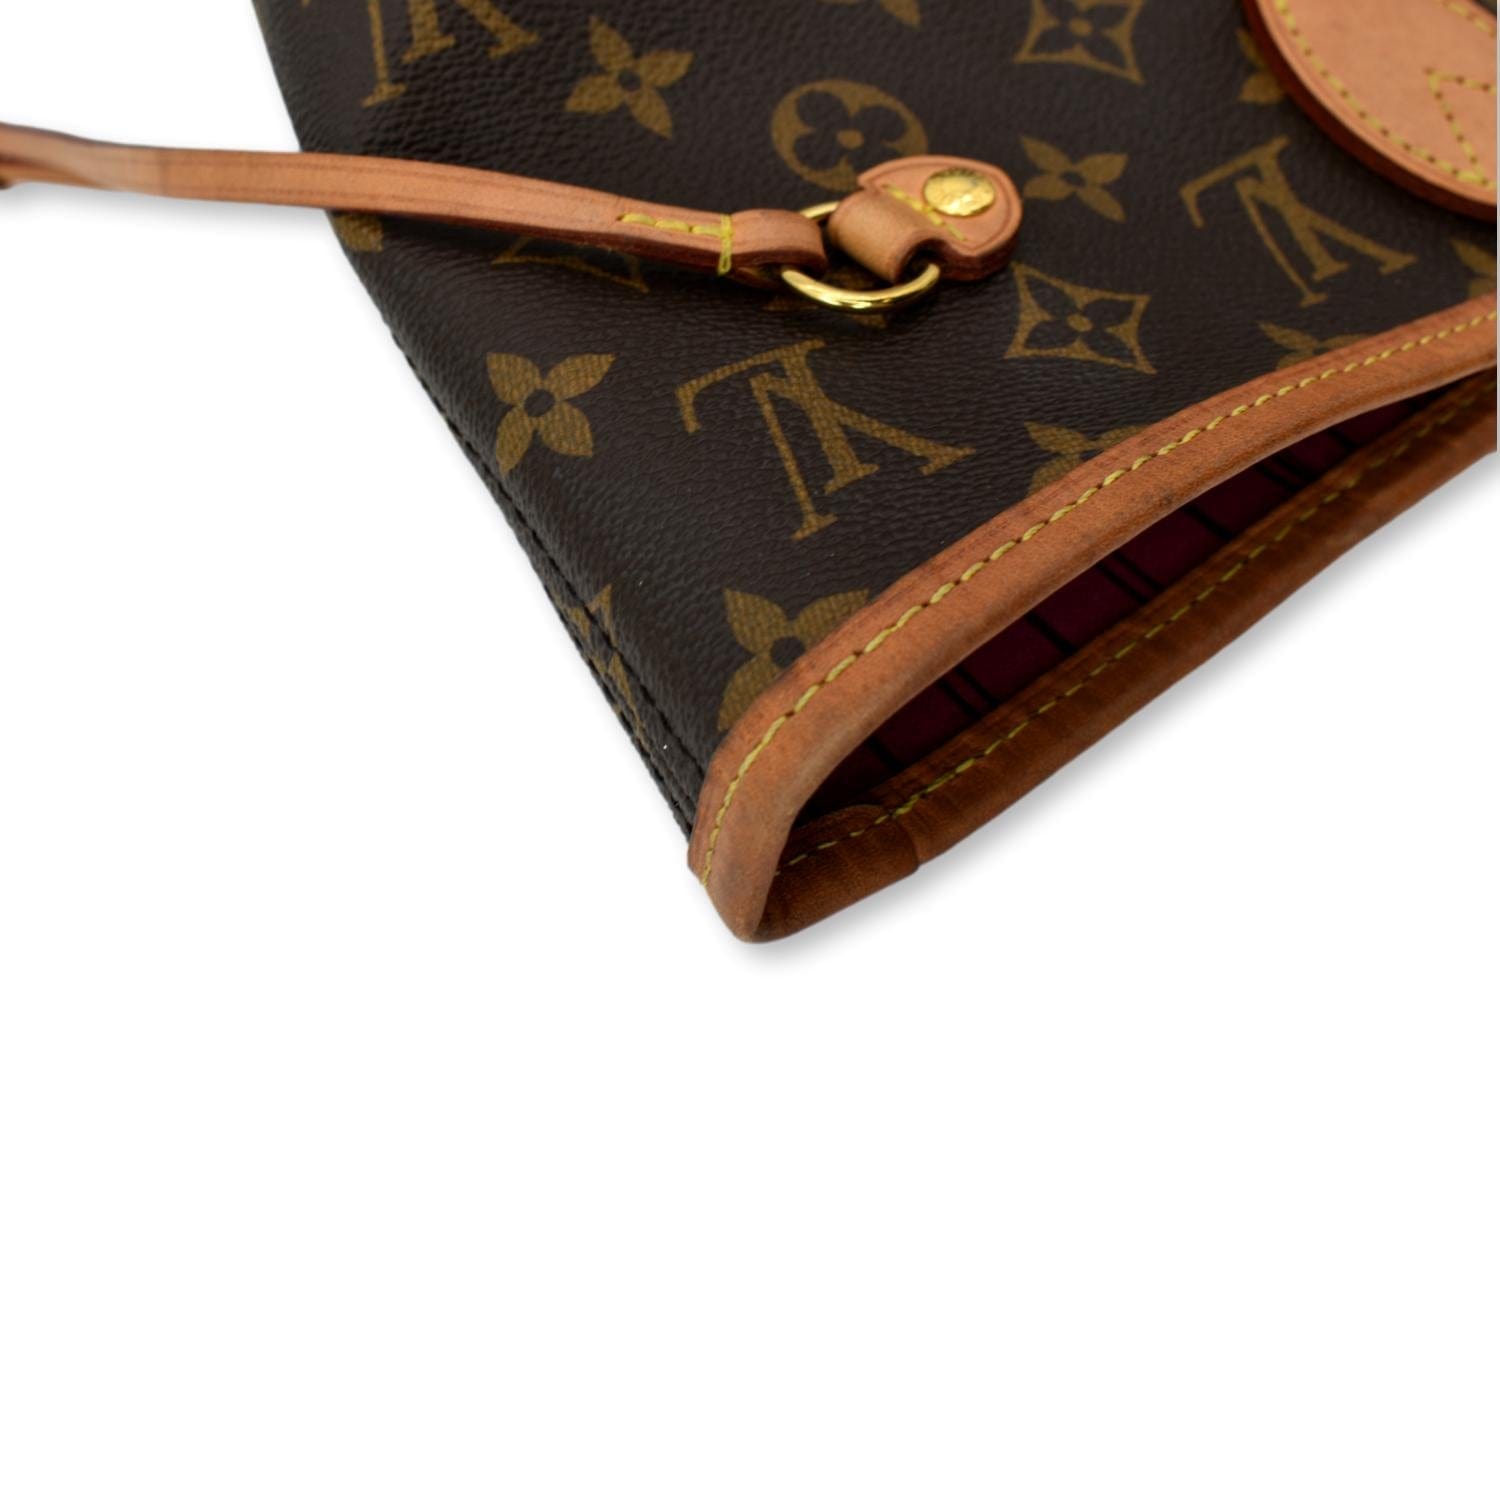 🚨The Louis Vuitton Neverfull is being DISCONTINUED😱 